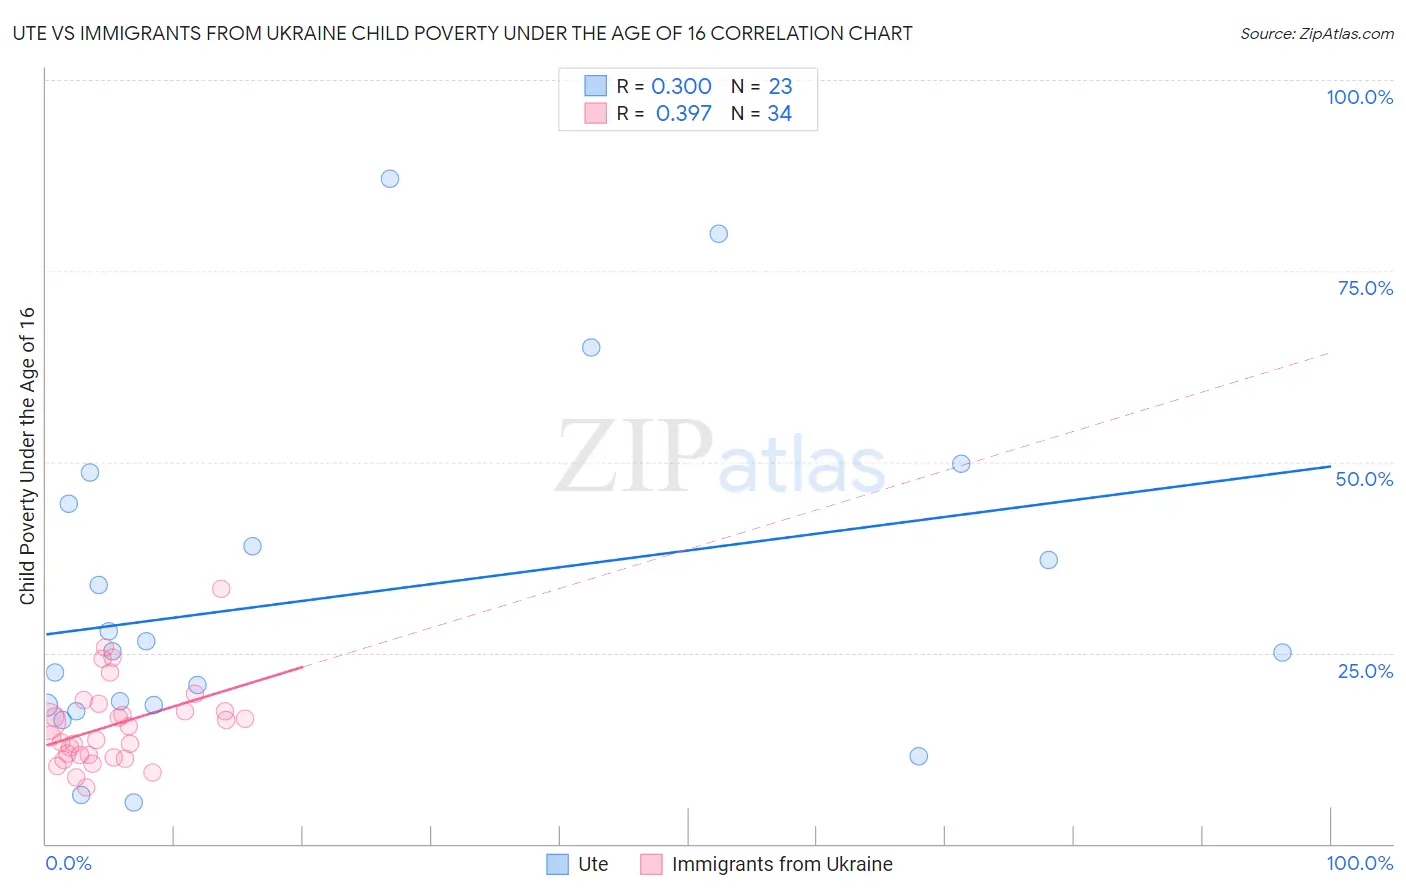 Ute vs Immigrants from Ukraine Child Poverty Under the Age of 16